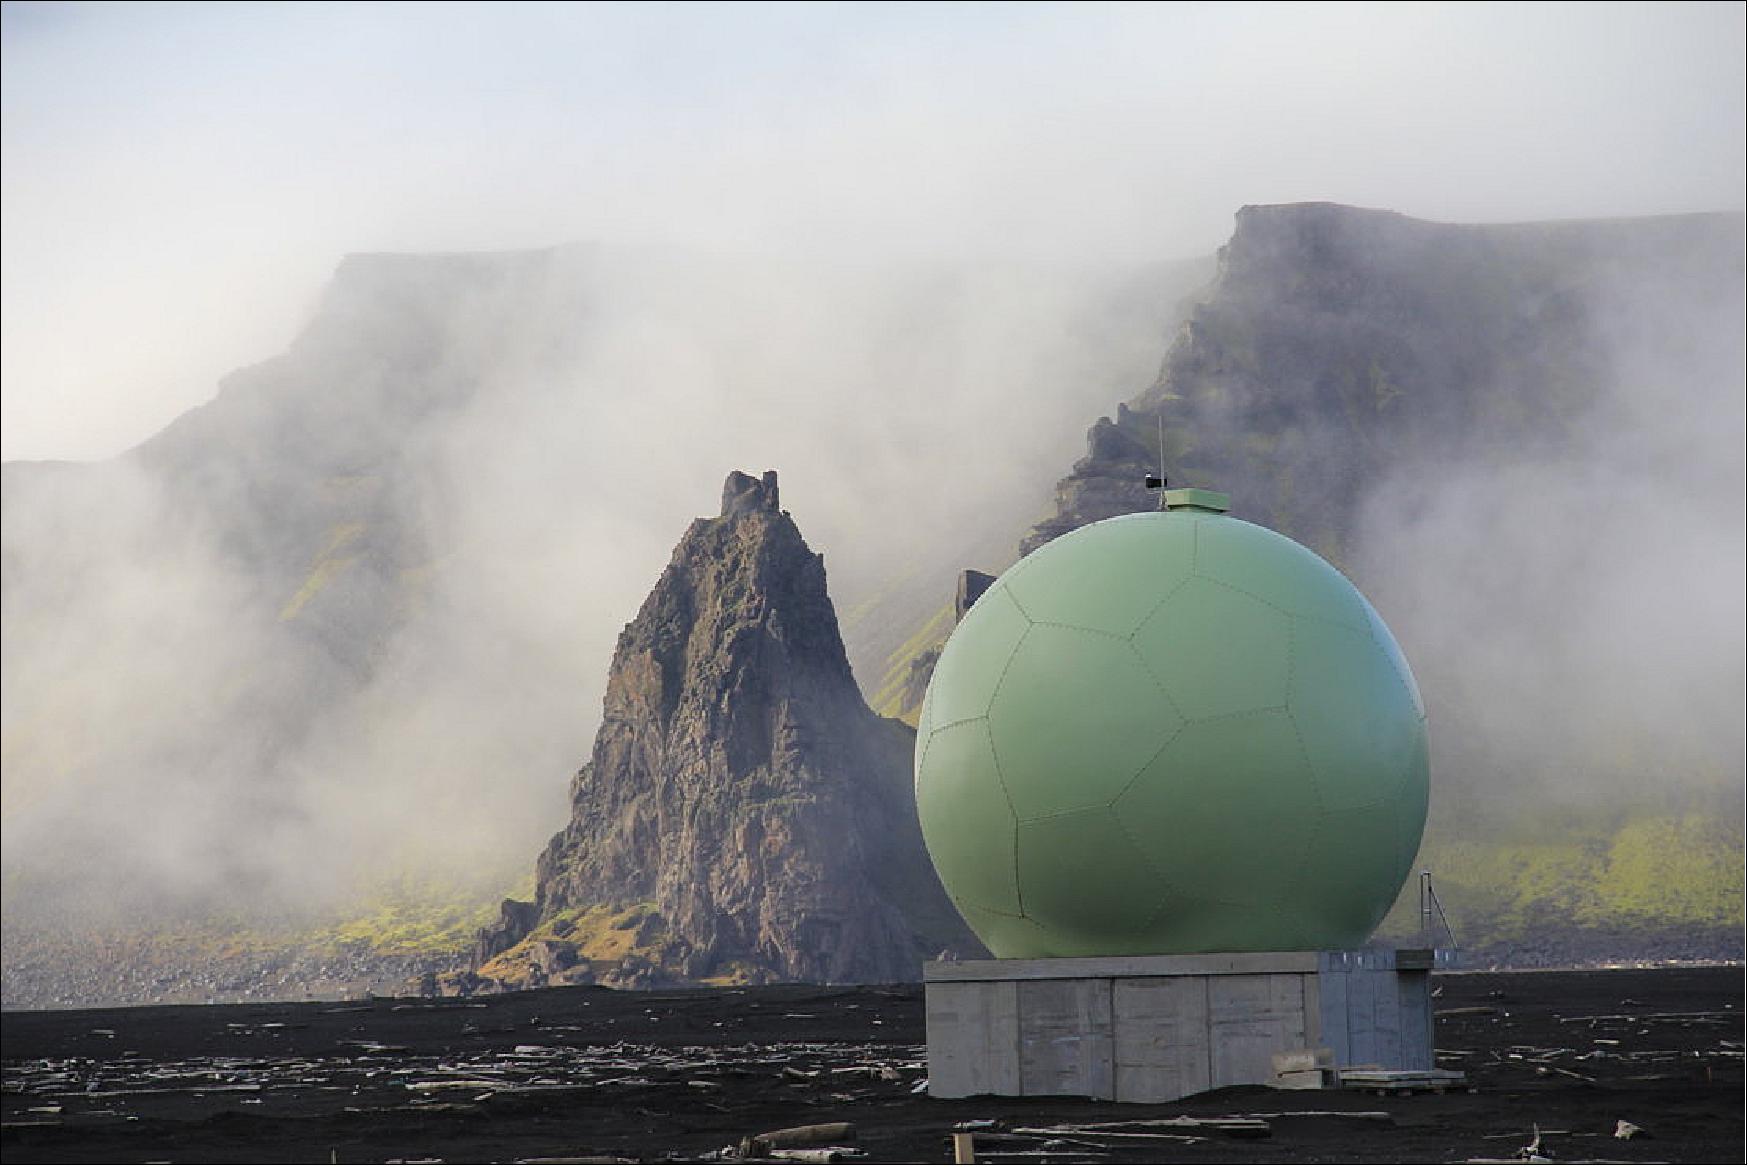 Figure 109: Protective 'radome' housing for the Galileo ground station on desolate Jan Mayen Island in the Norwegian Arctic. The site is housing a Galileo Sensor Station plus satellite link to pass data back to the Galileo ground system (image credit: ESA/Fermin Alvarez Lopez)